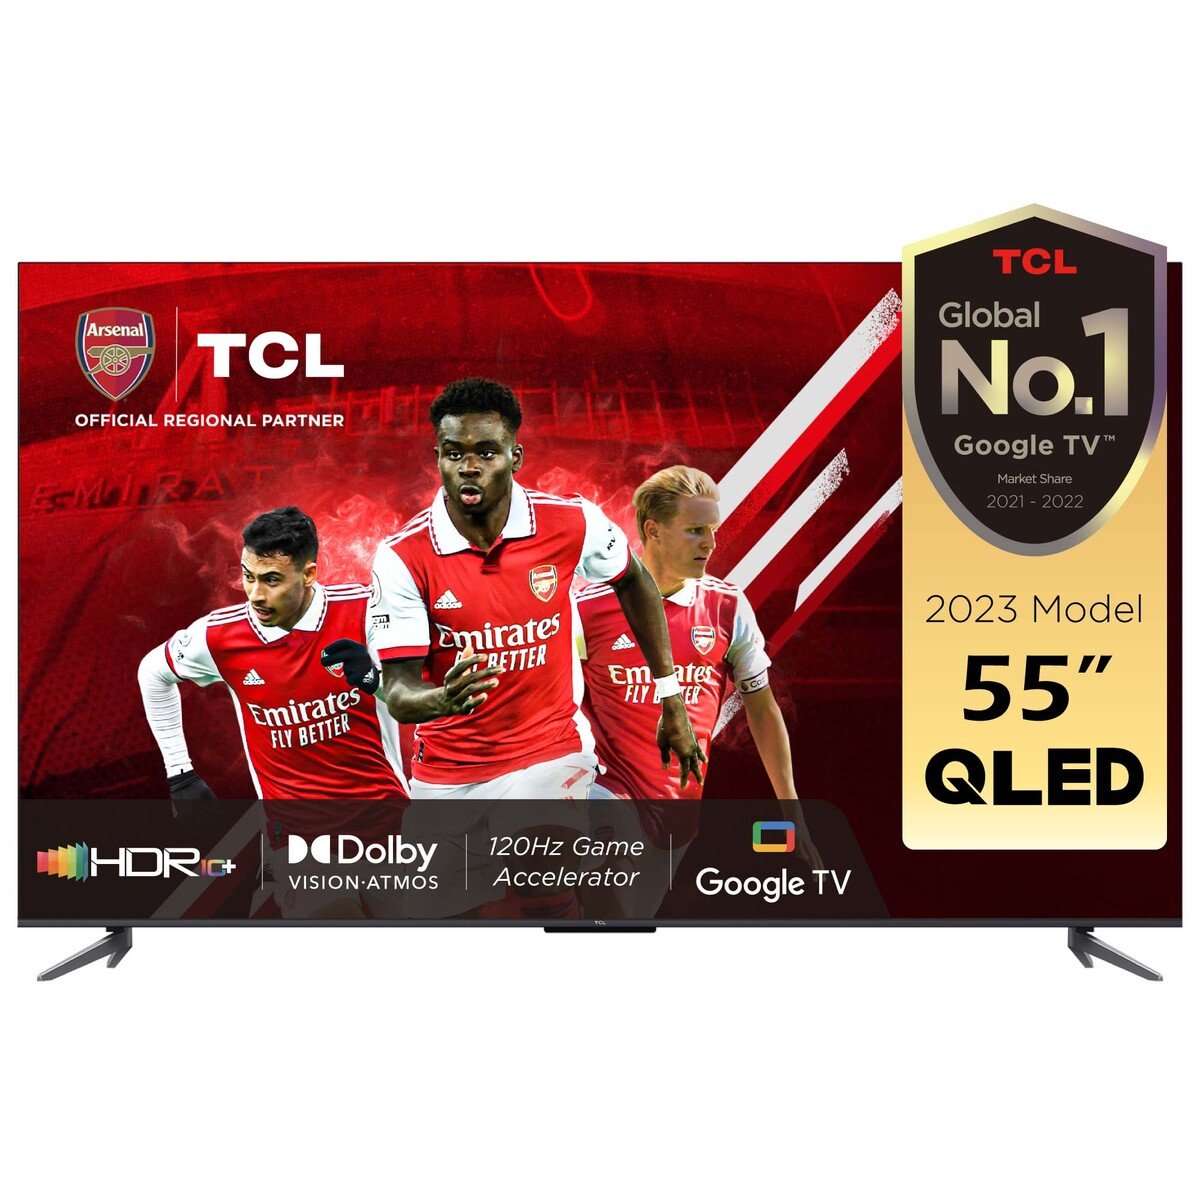 TCL C645 55 inch Ultra HD 4K Smart QLED TV (55C645) Price in India 2024,  Full Specs & Review